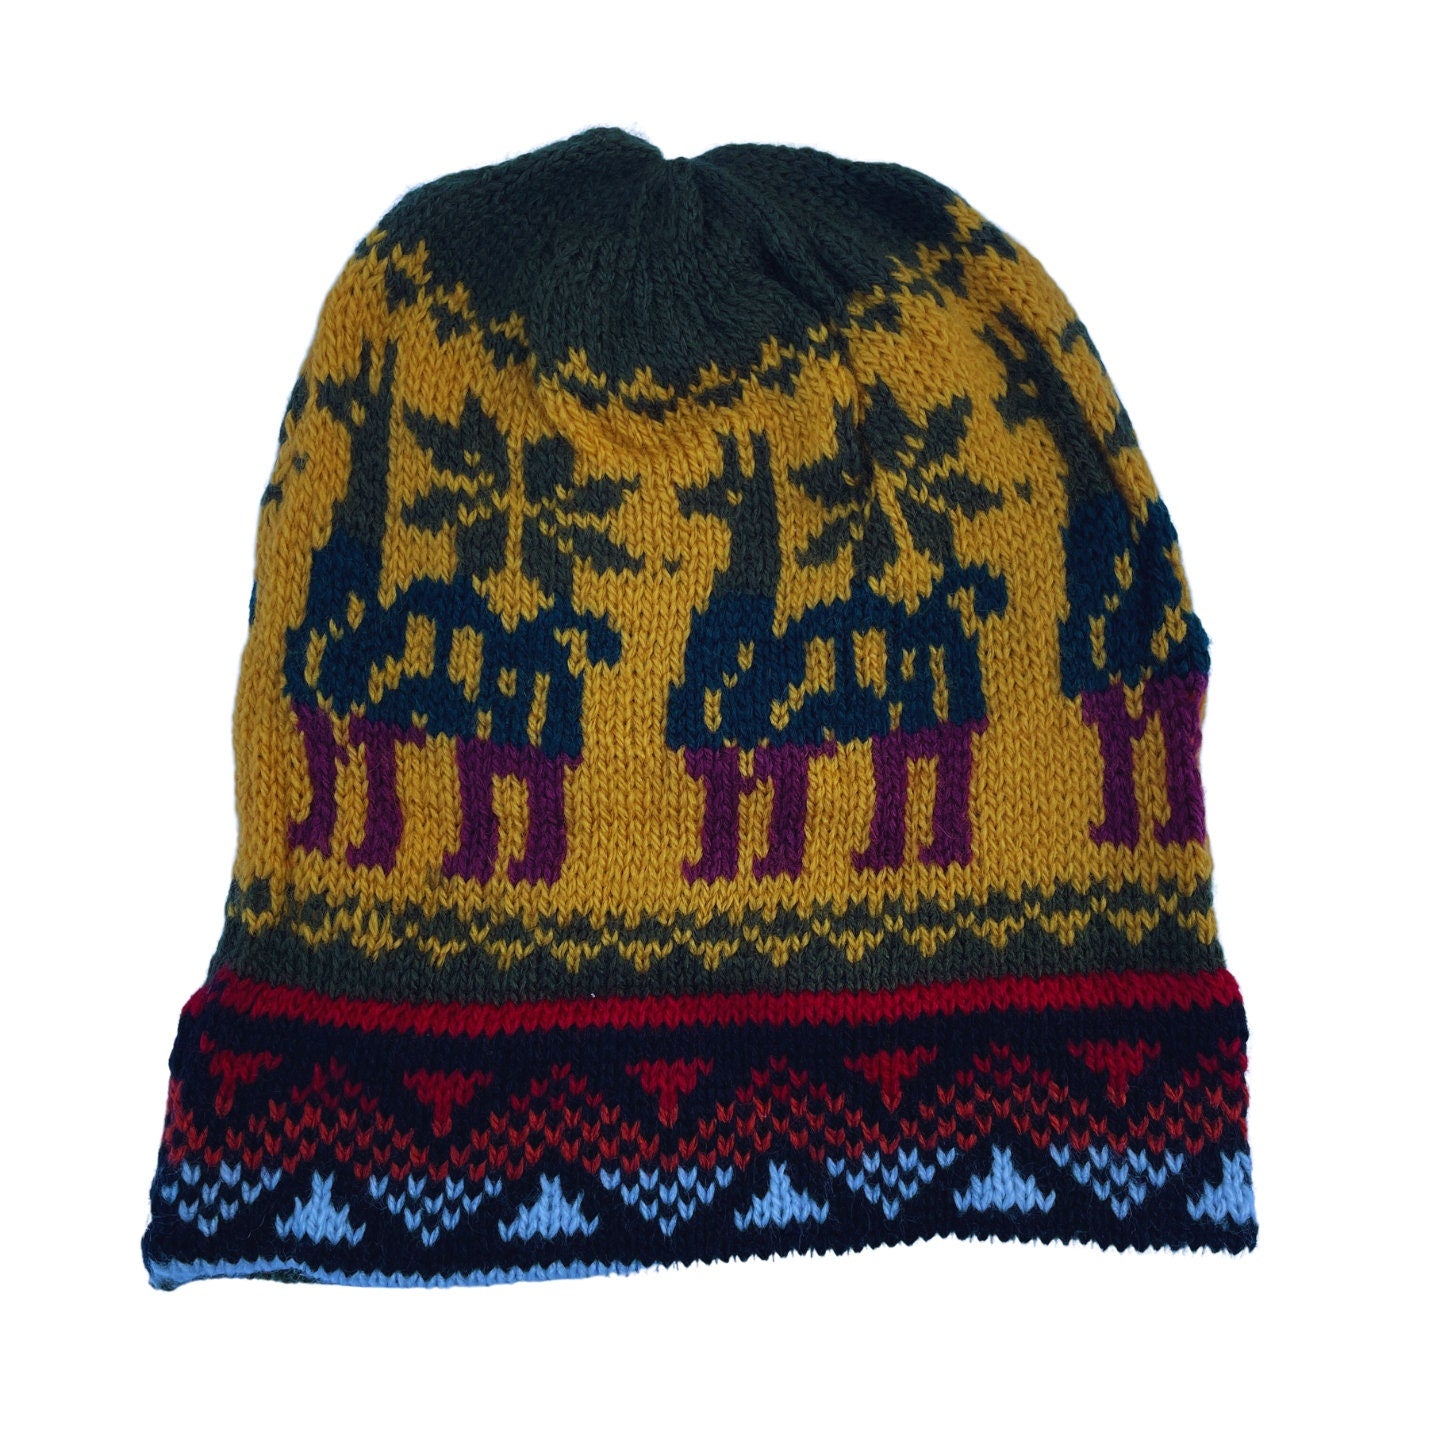 Knitted Beanie Hat | Llama Olive Mustard